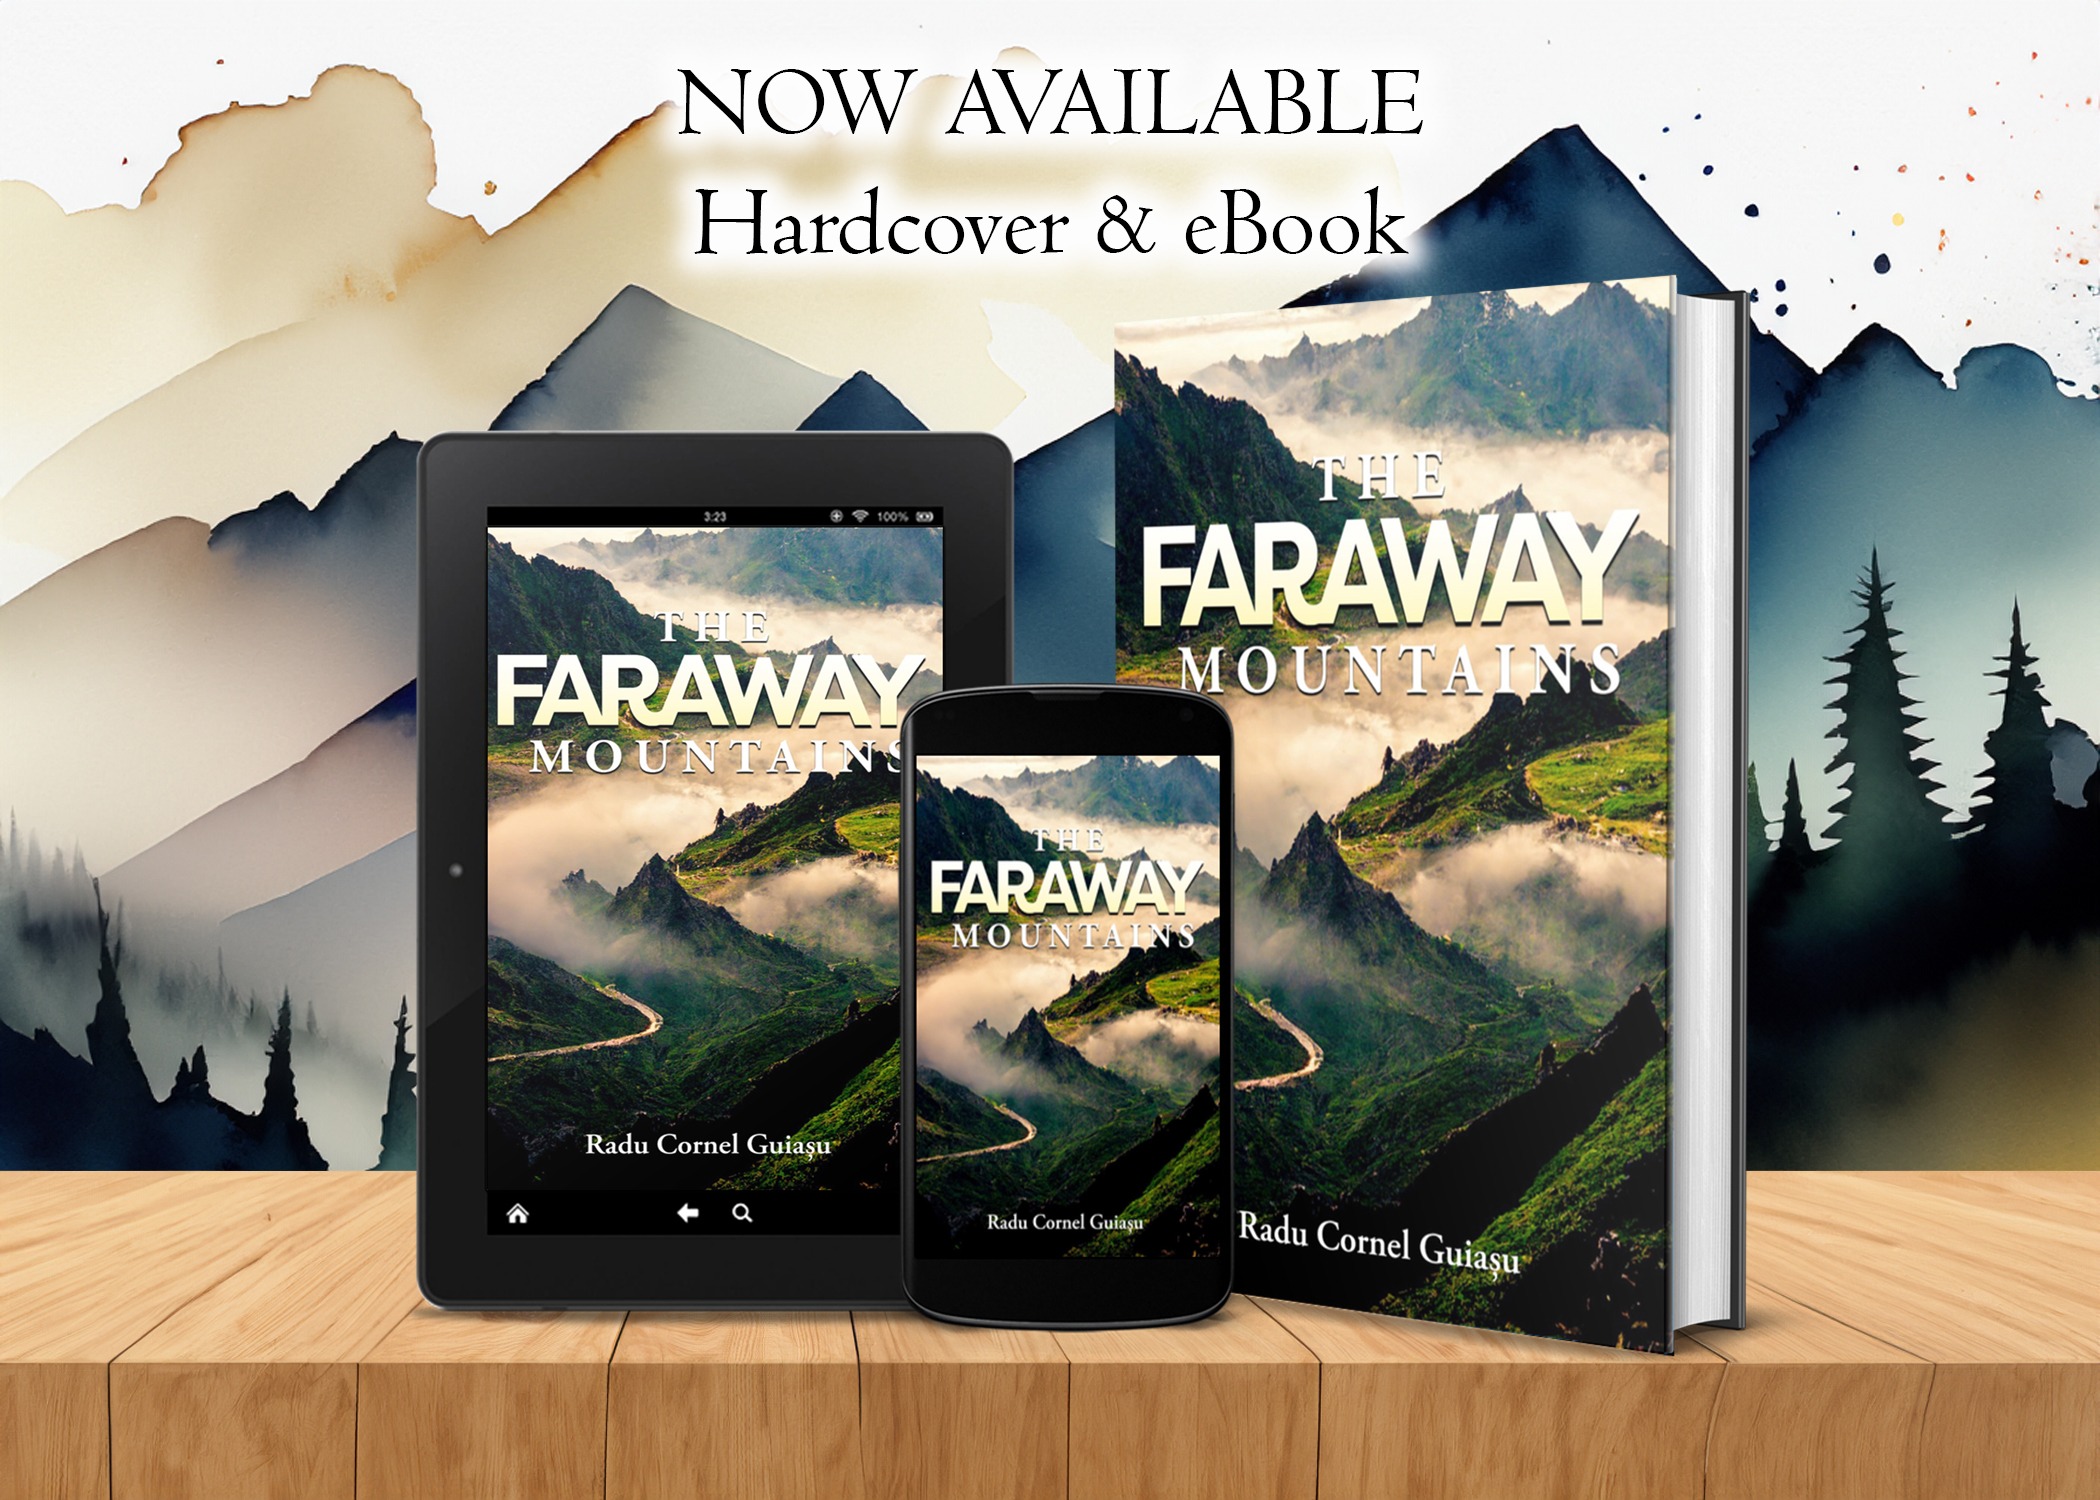 The Faraway Mountains by Radu Guiasu, now available from Histria Books.